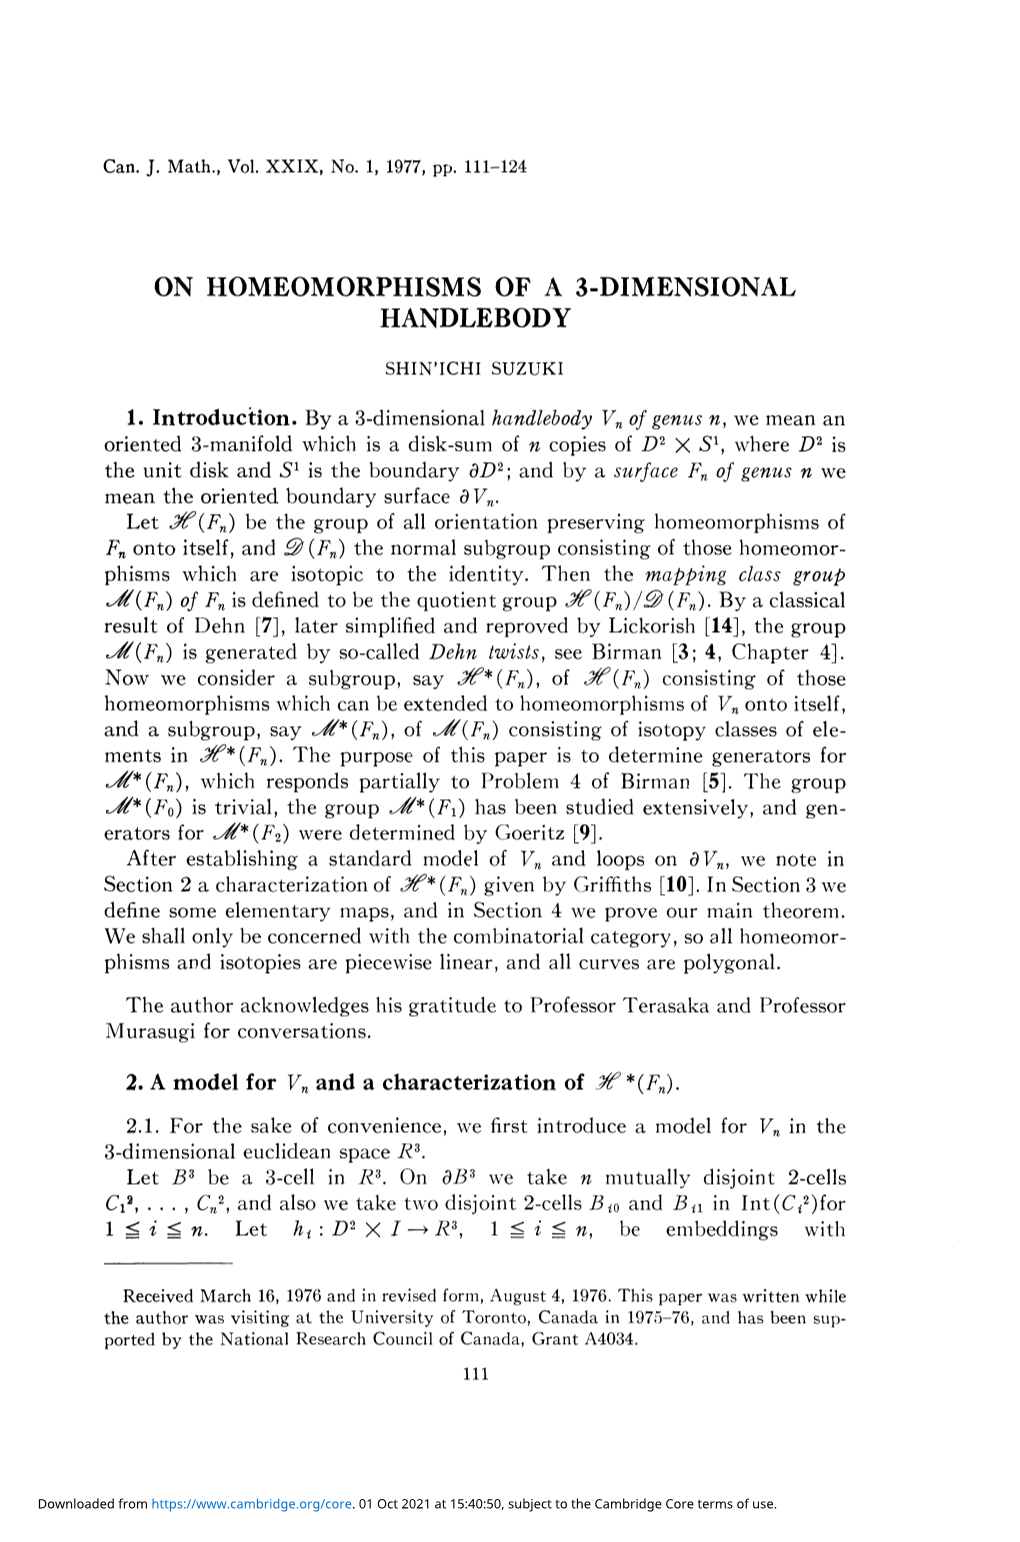 On Homeomorphisms of a 3-Dimensional Handlebody